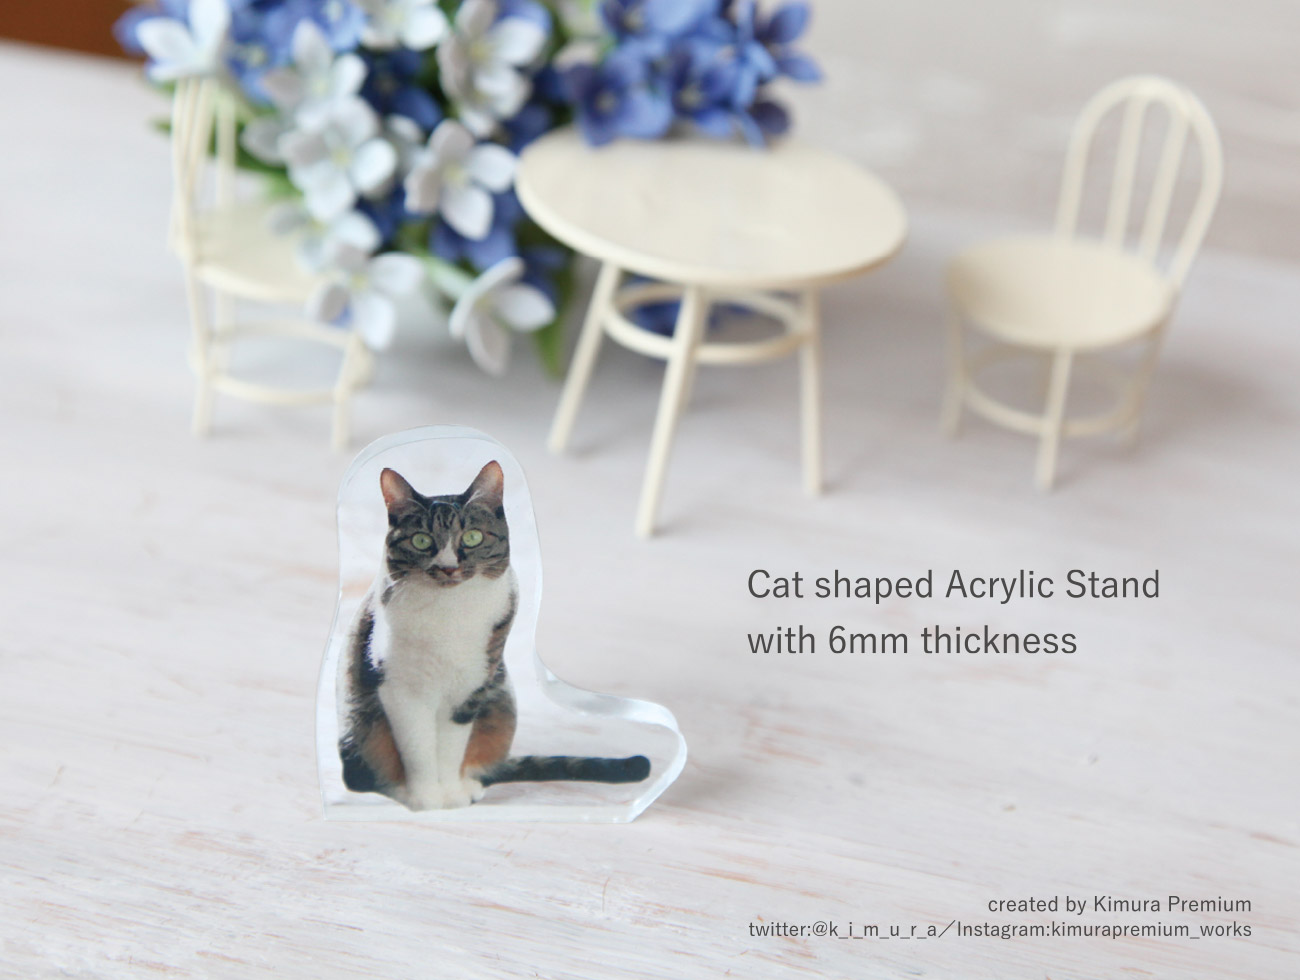 Cat shaped Acrylic Stand with 6mm thickness